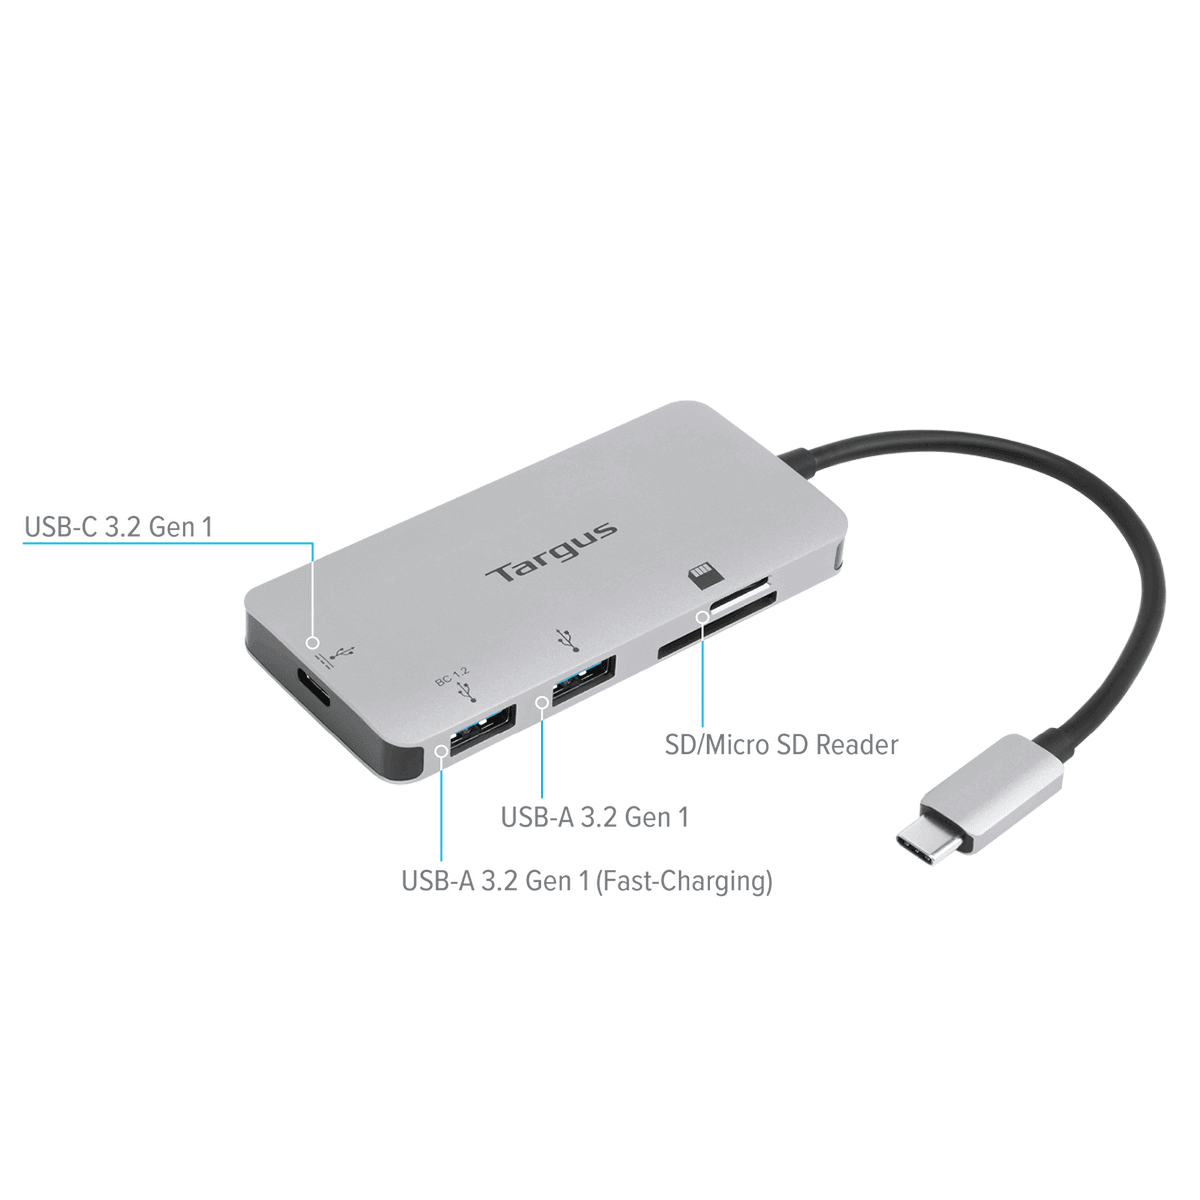 USB-C Ethernet Adapter with 3x USB-A Ports and 1x USB-C Port with